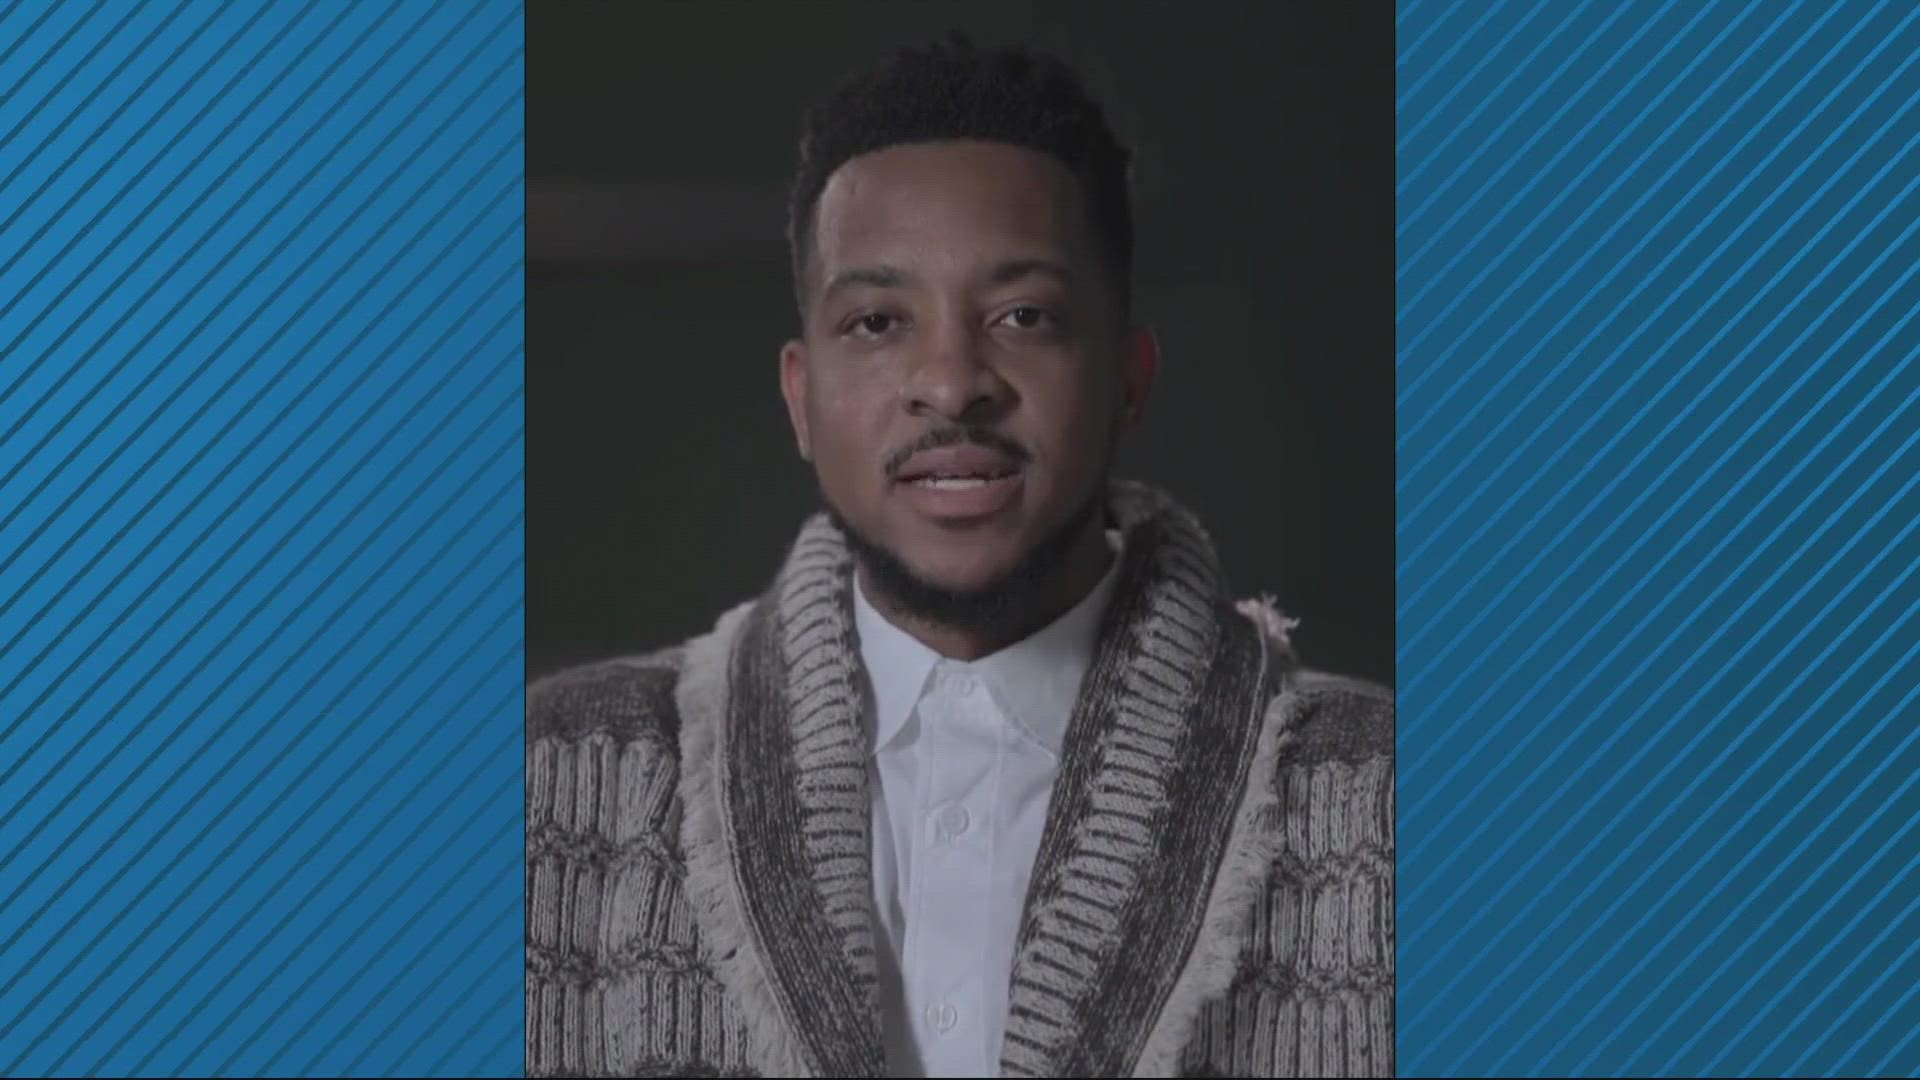 In a video posted to his Twitter, CJ McCollum explained why he got vaccinated. He also urged others to get information from credible sources and do the right thing.